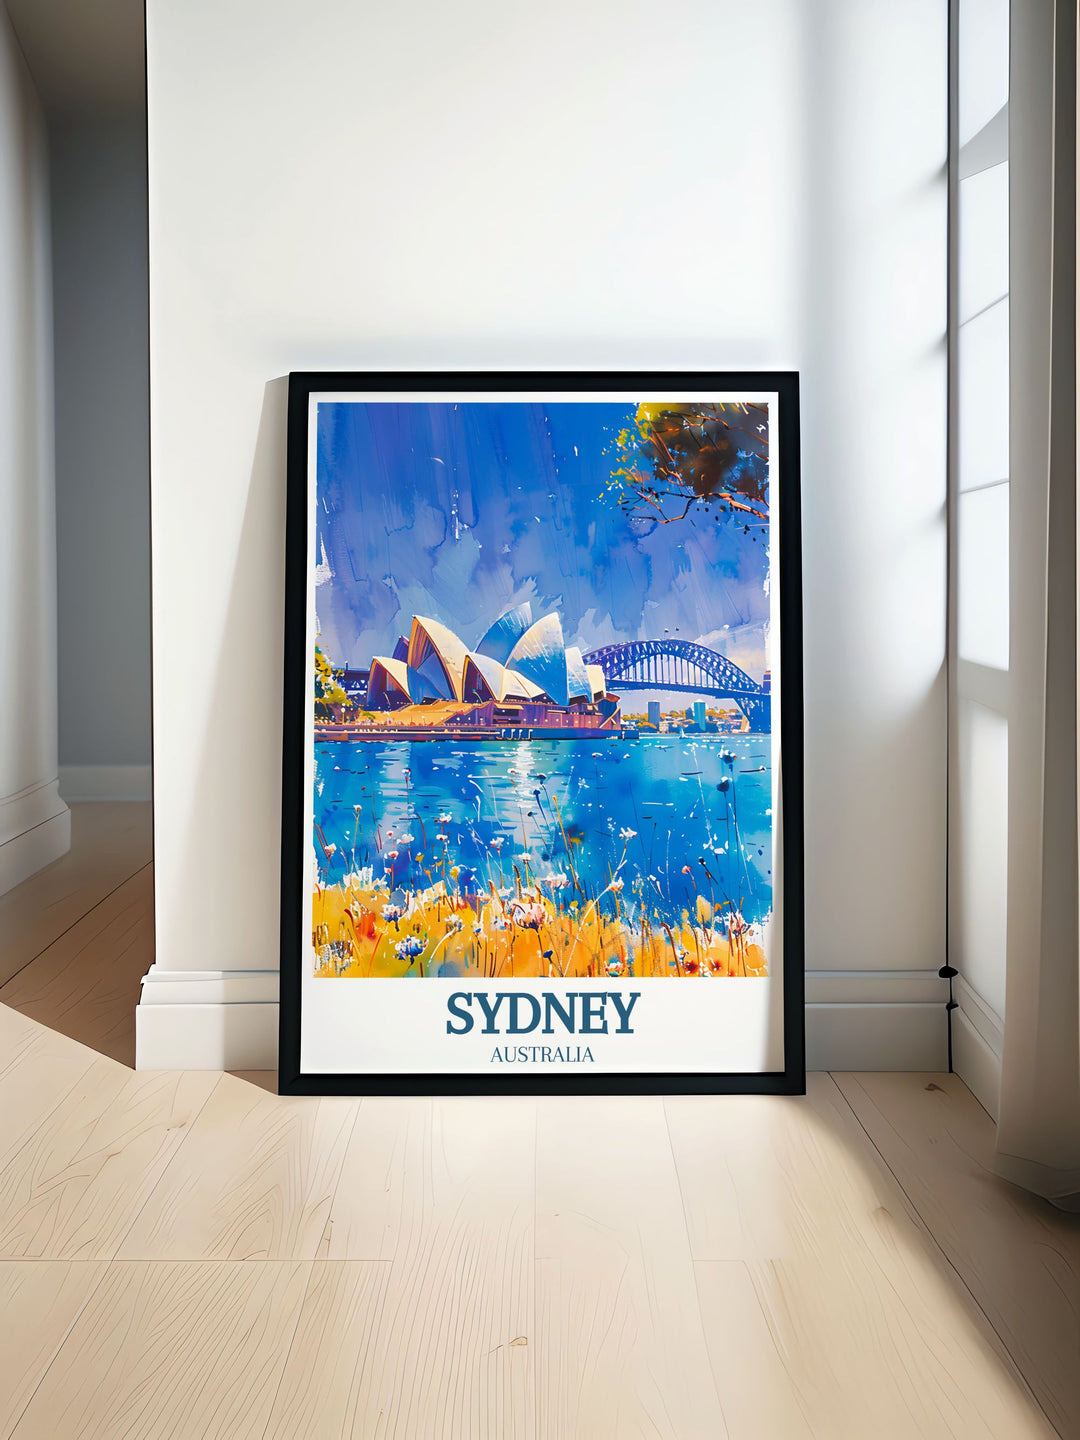 Beautiful Sydney Harbour Bridge and Sydney Opera House artwork in a vintage travel print capturing the iconic landmarks of Sydney perfect for adding a touch of Australia to your home decor or as a thoughtful gift for travel enthusiasts and art lovers